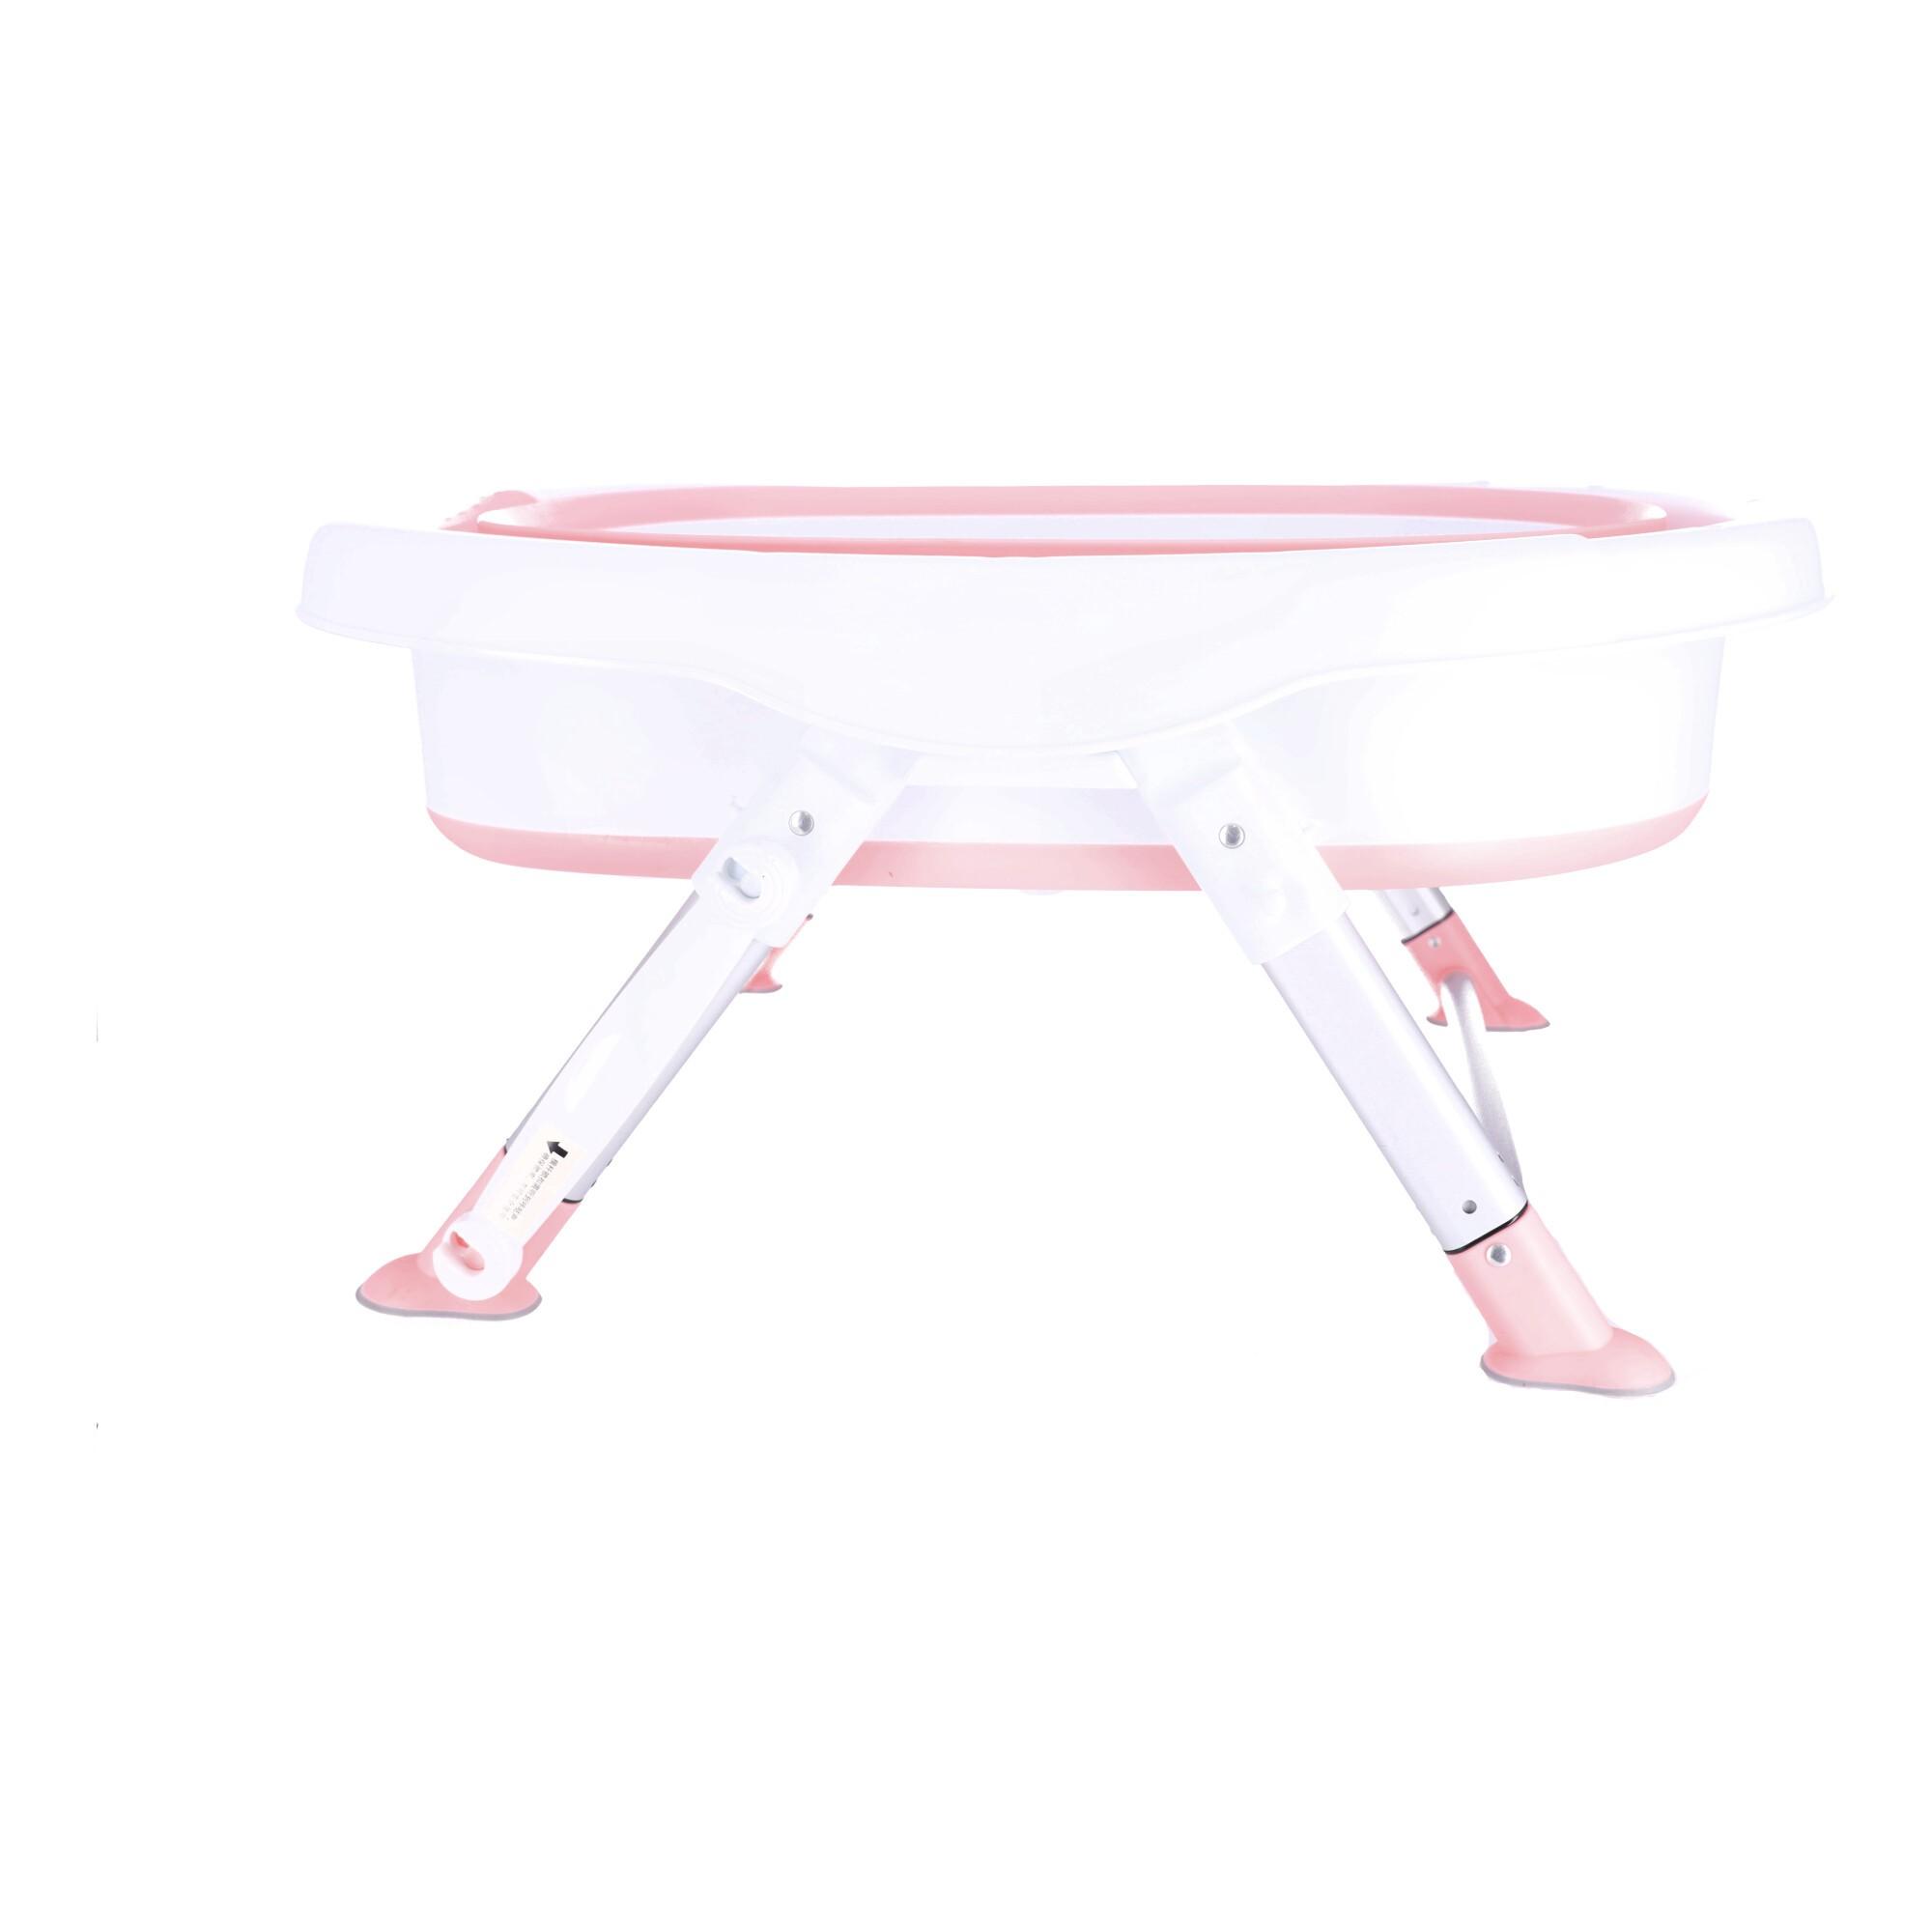 Baby folding bath tub with a pillow in color pink - pink